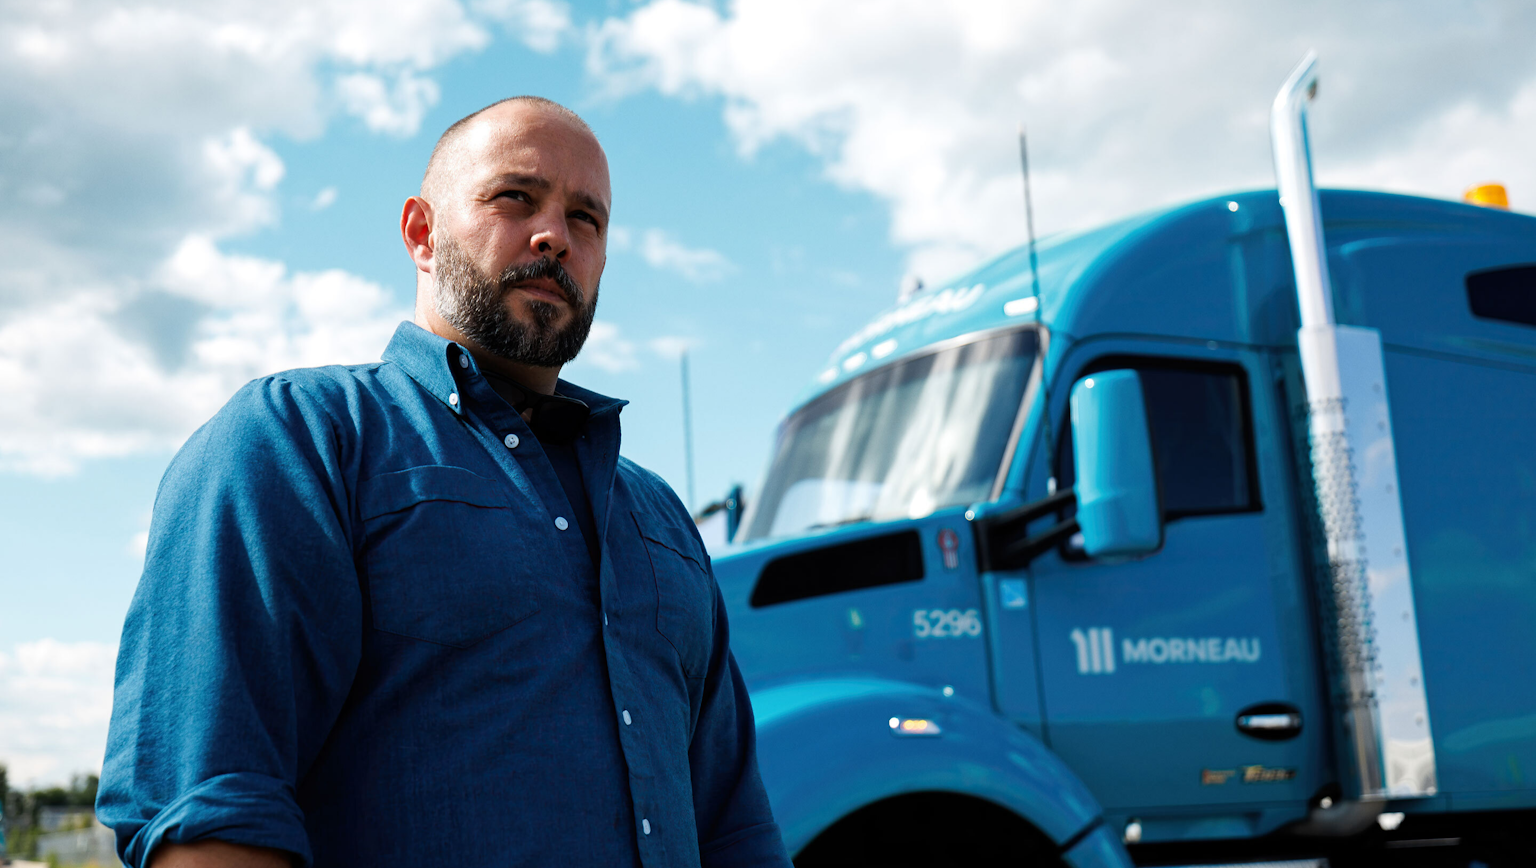 A Groupe Morneau employee poses in front of a truck